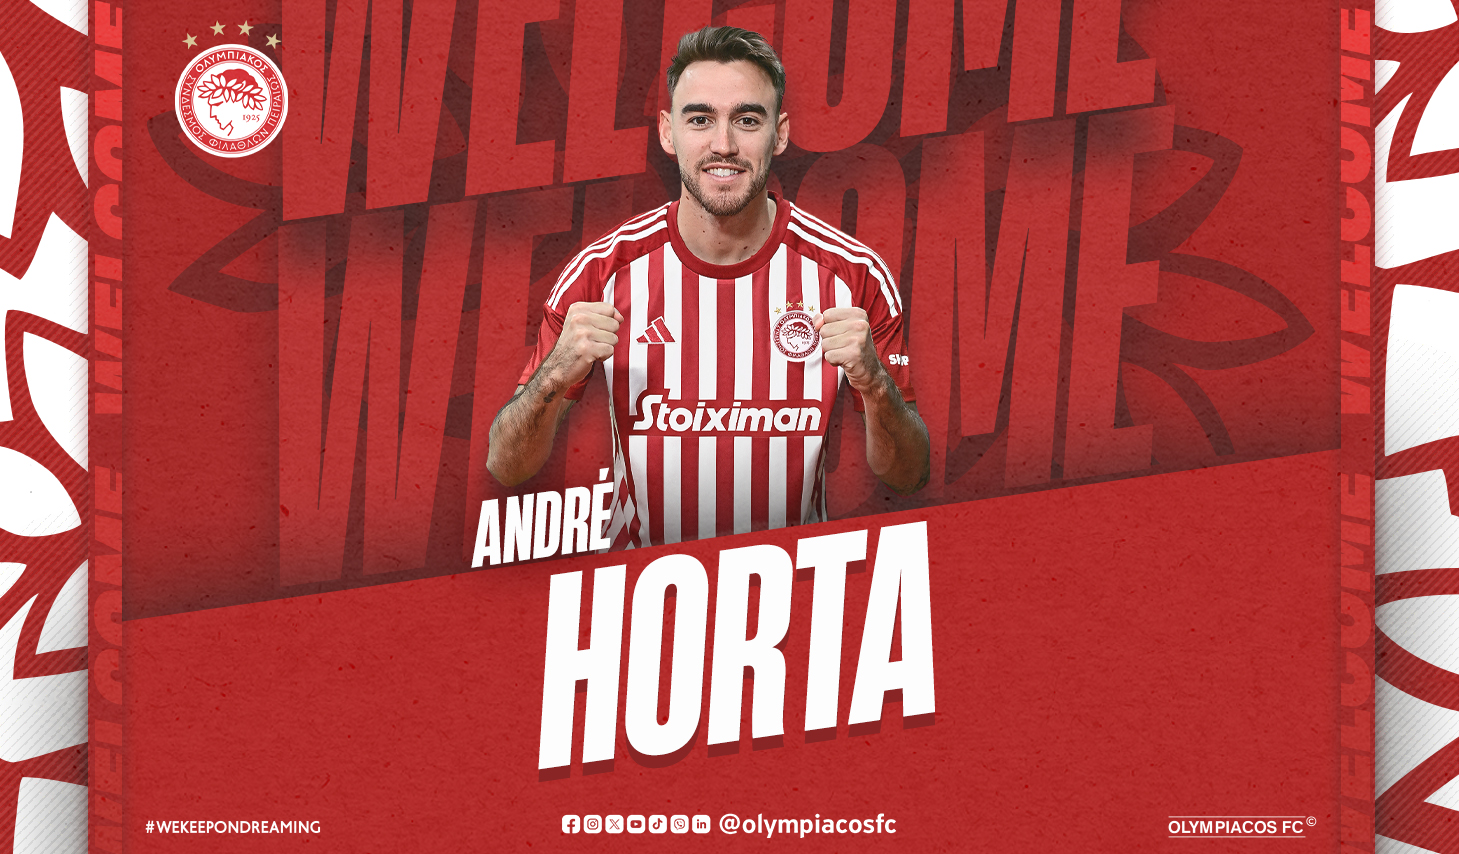 André Horta joins Olympiacos